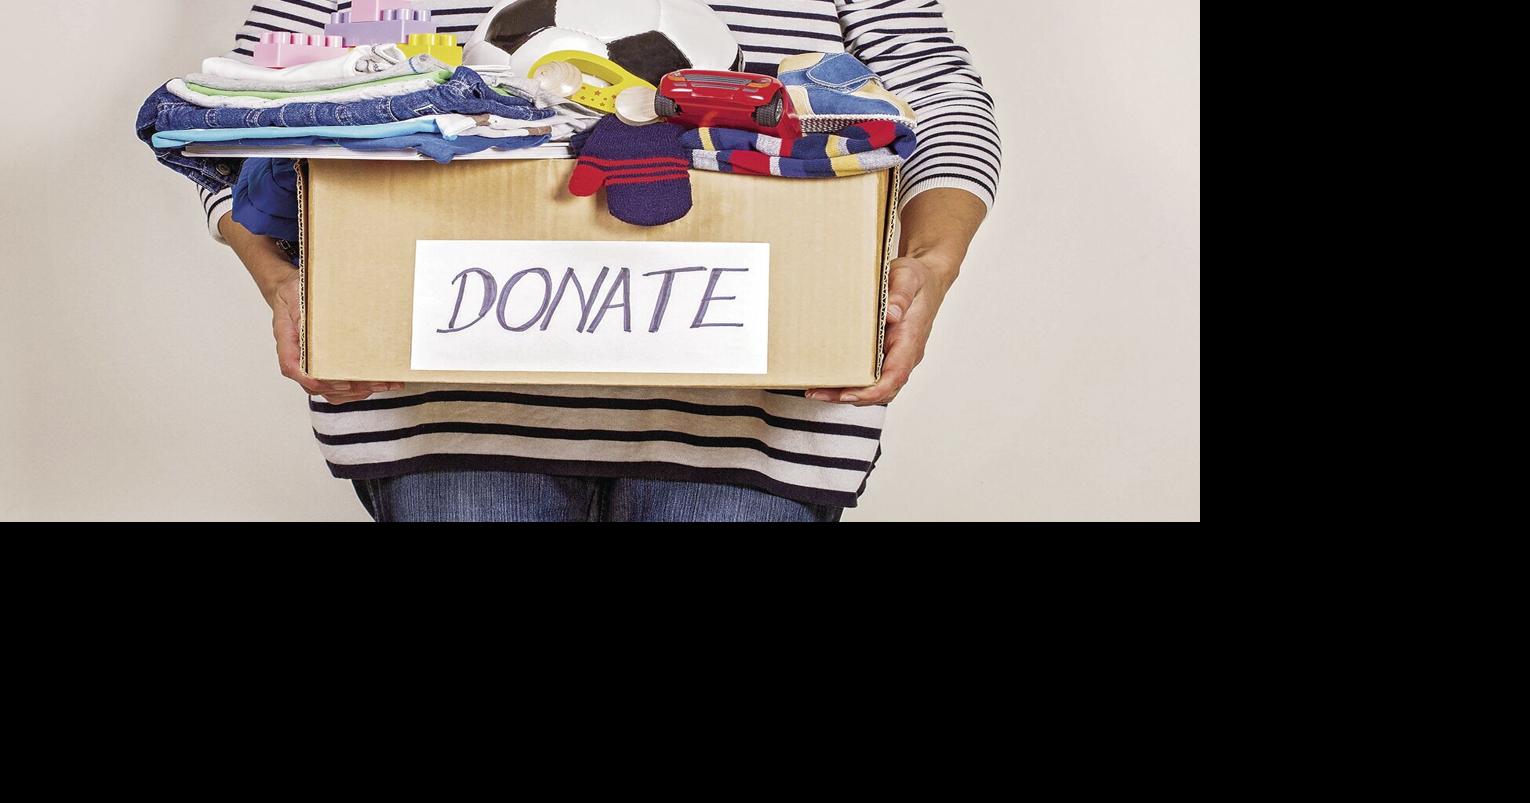 Golden Isles Donations: Where to Donate Clothing, Toys